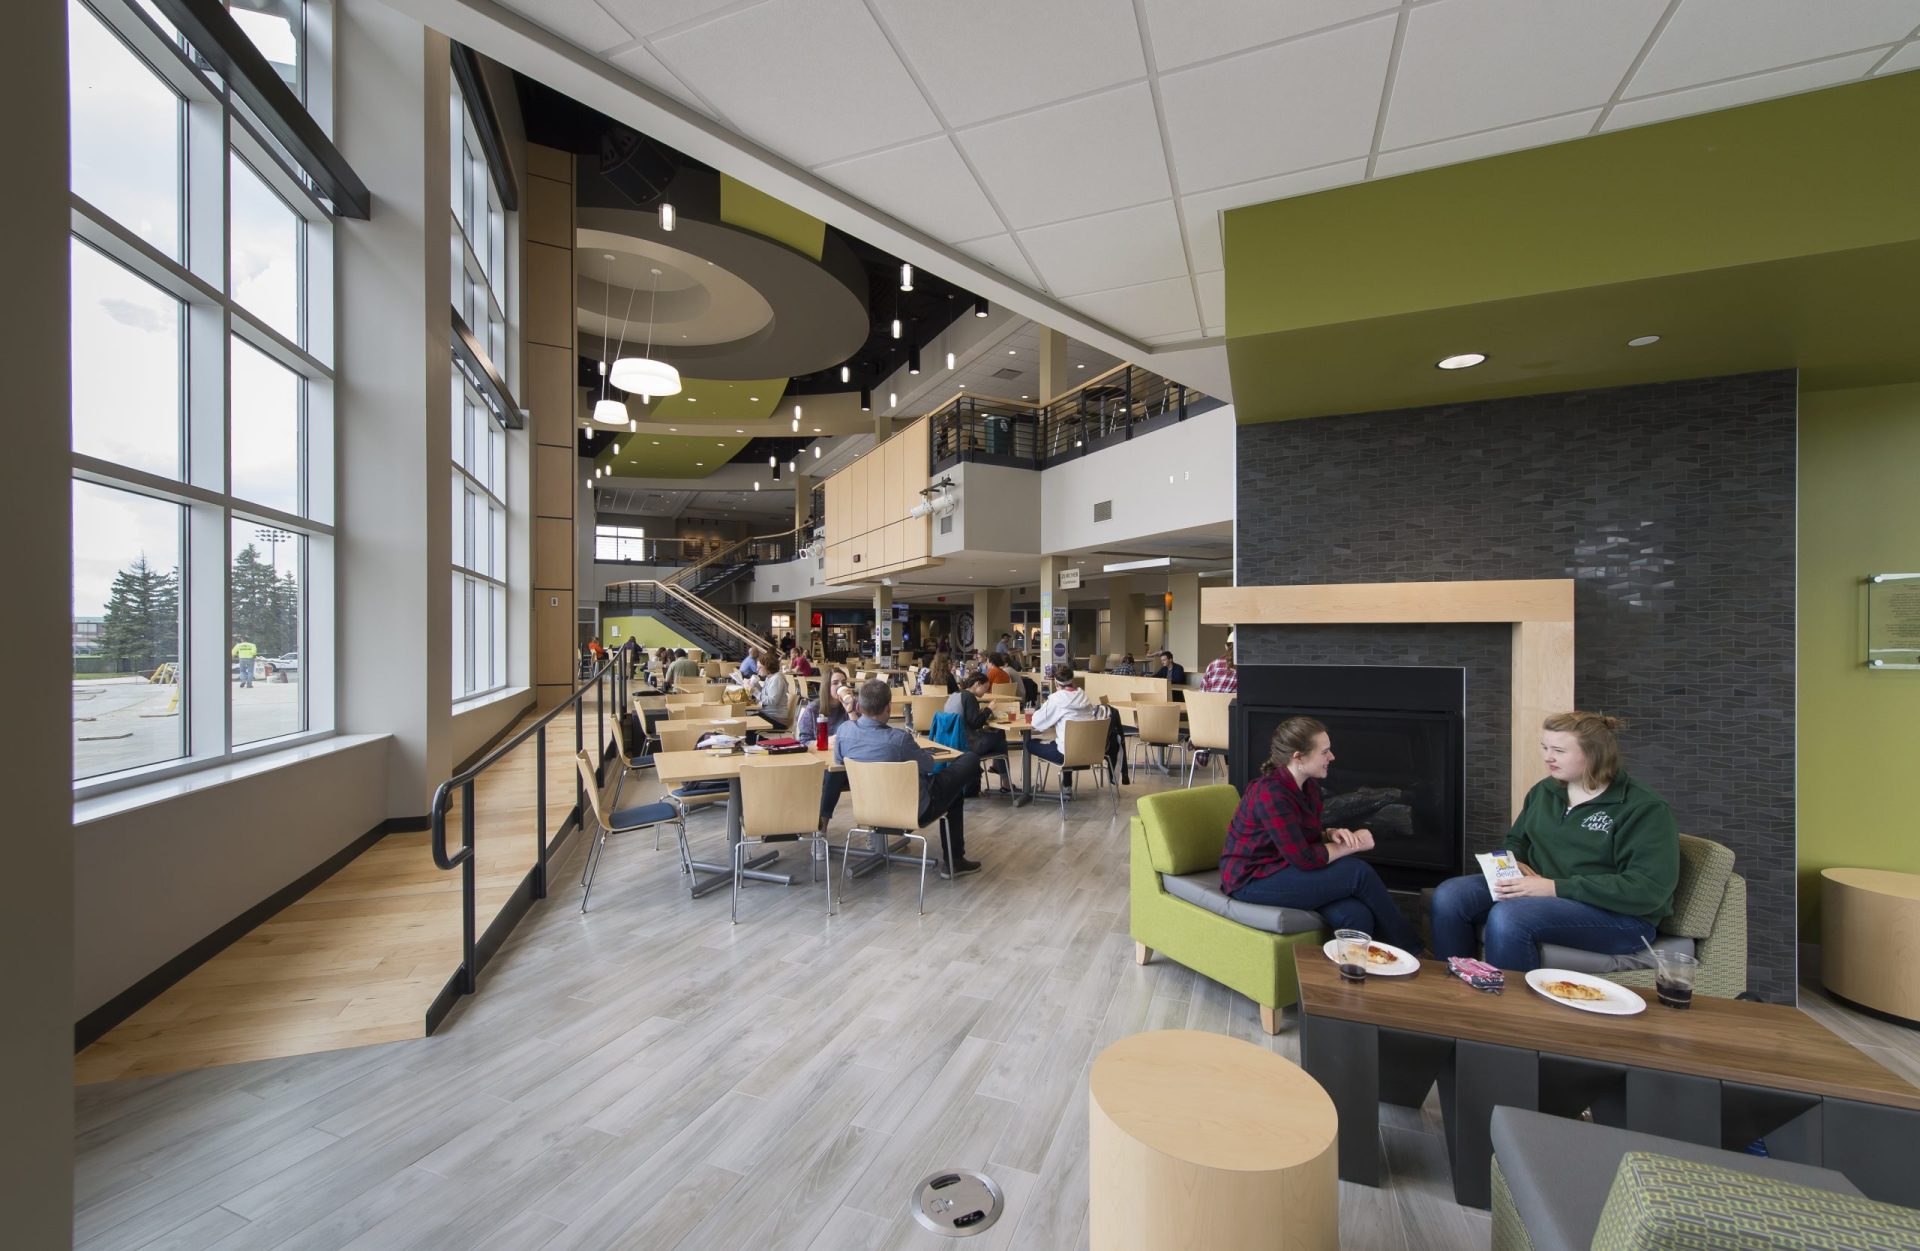 Taylor Student Center On-Campus Dining